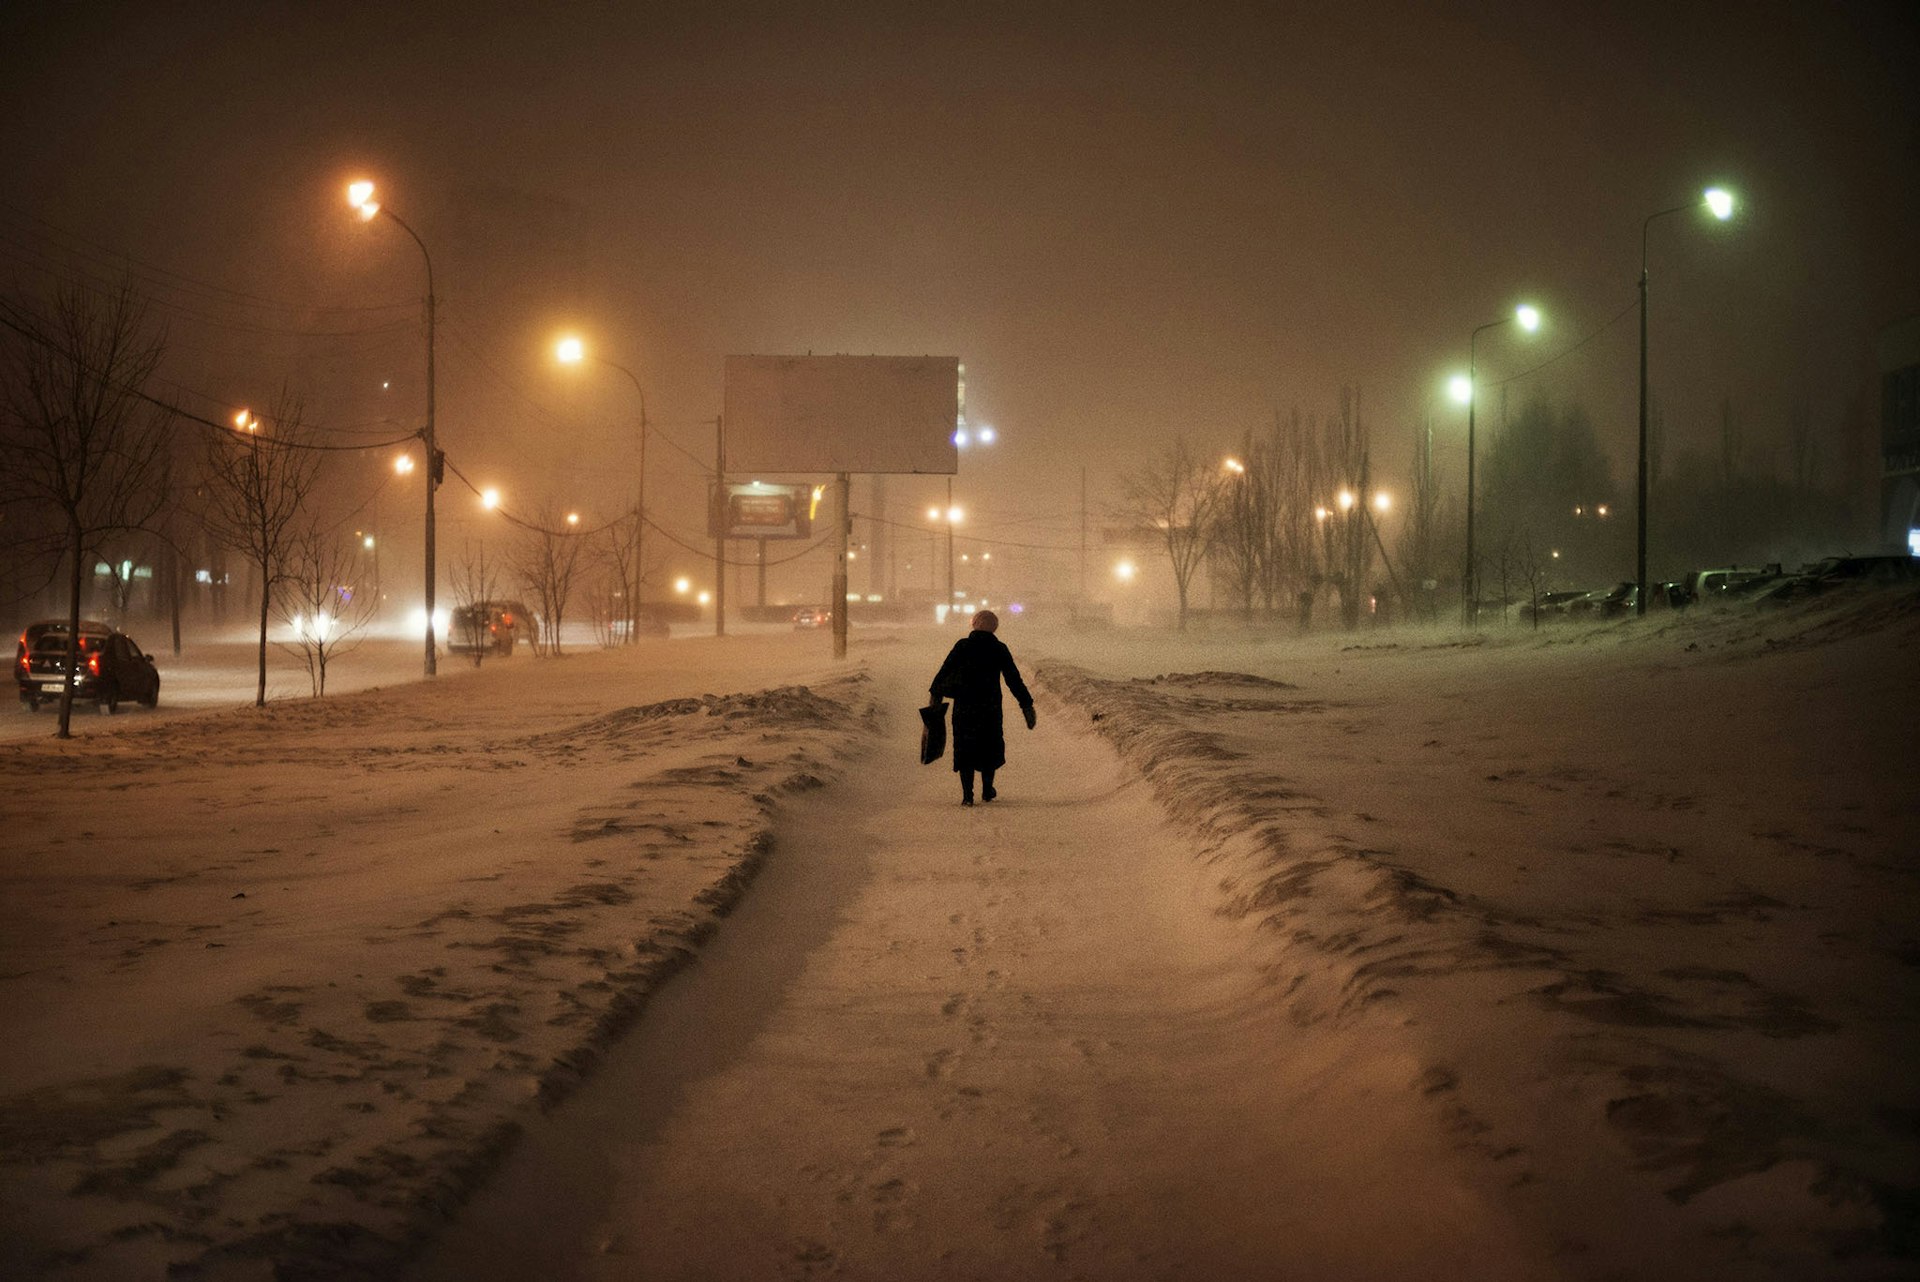 March 2013 - A woman walks on a street in the outskirts of Yekaterinburg.